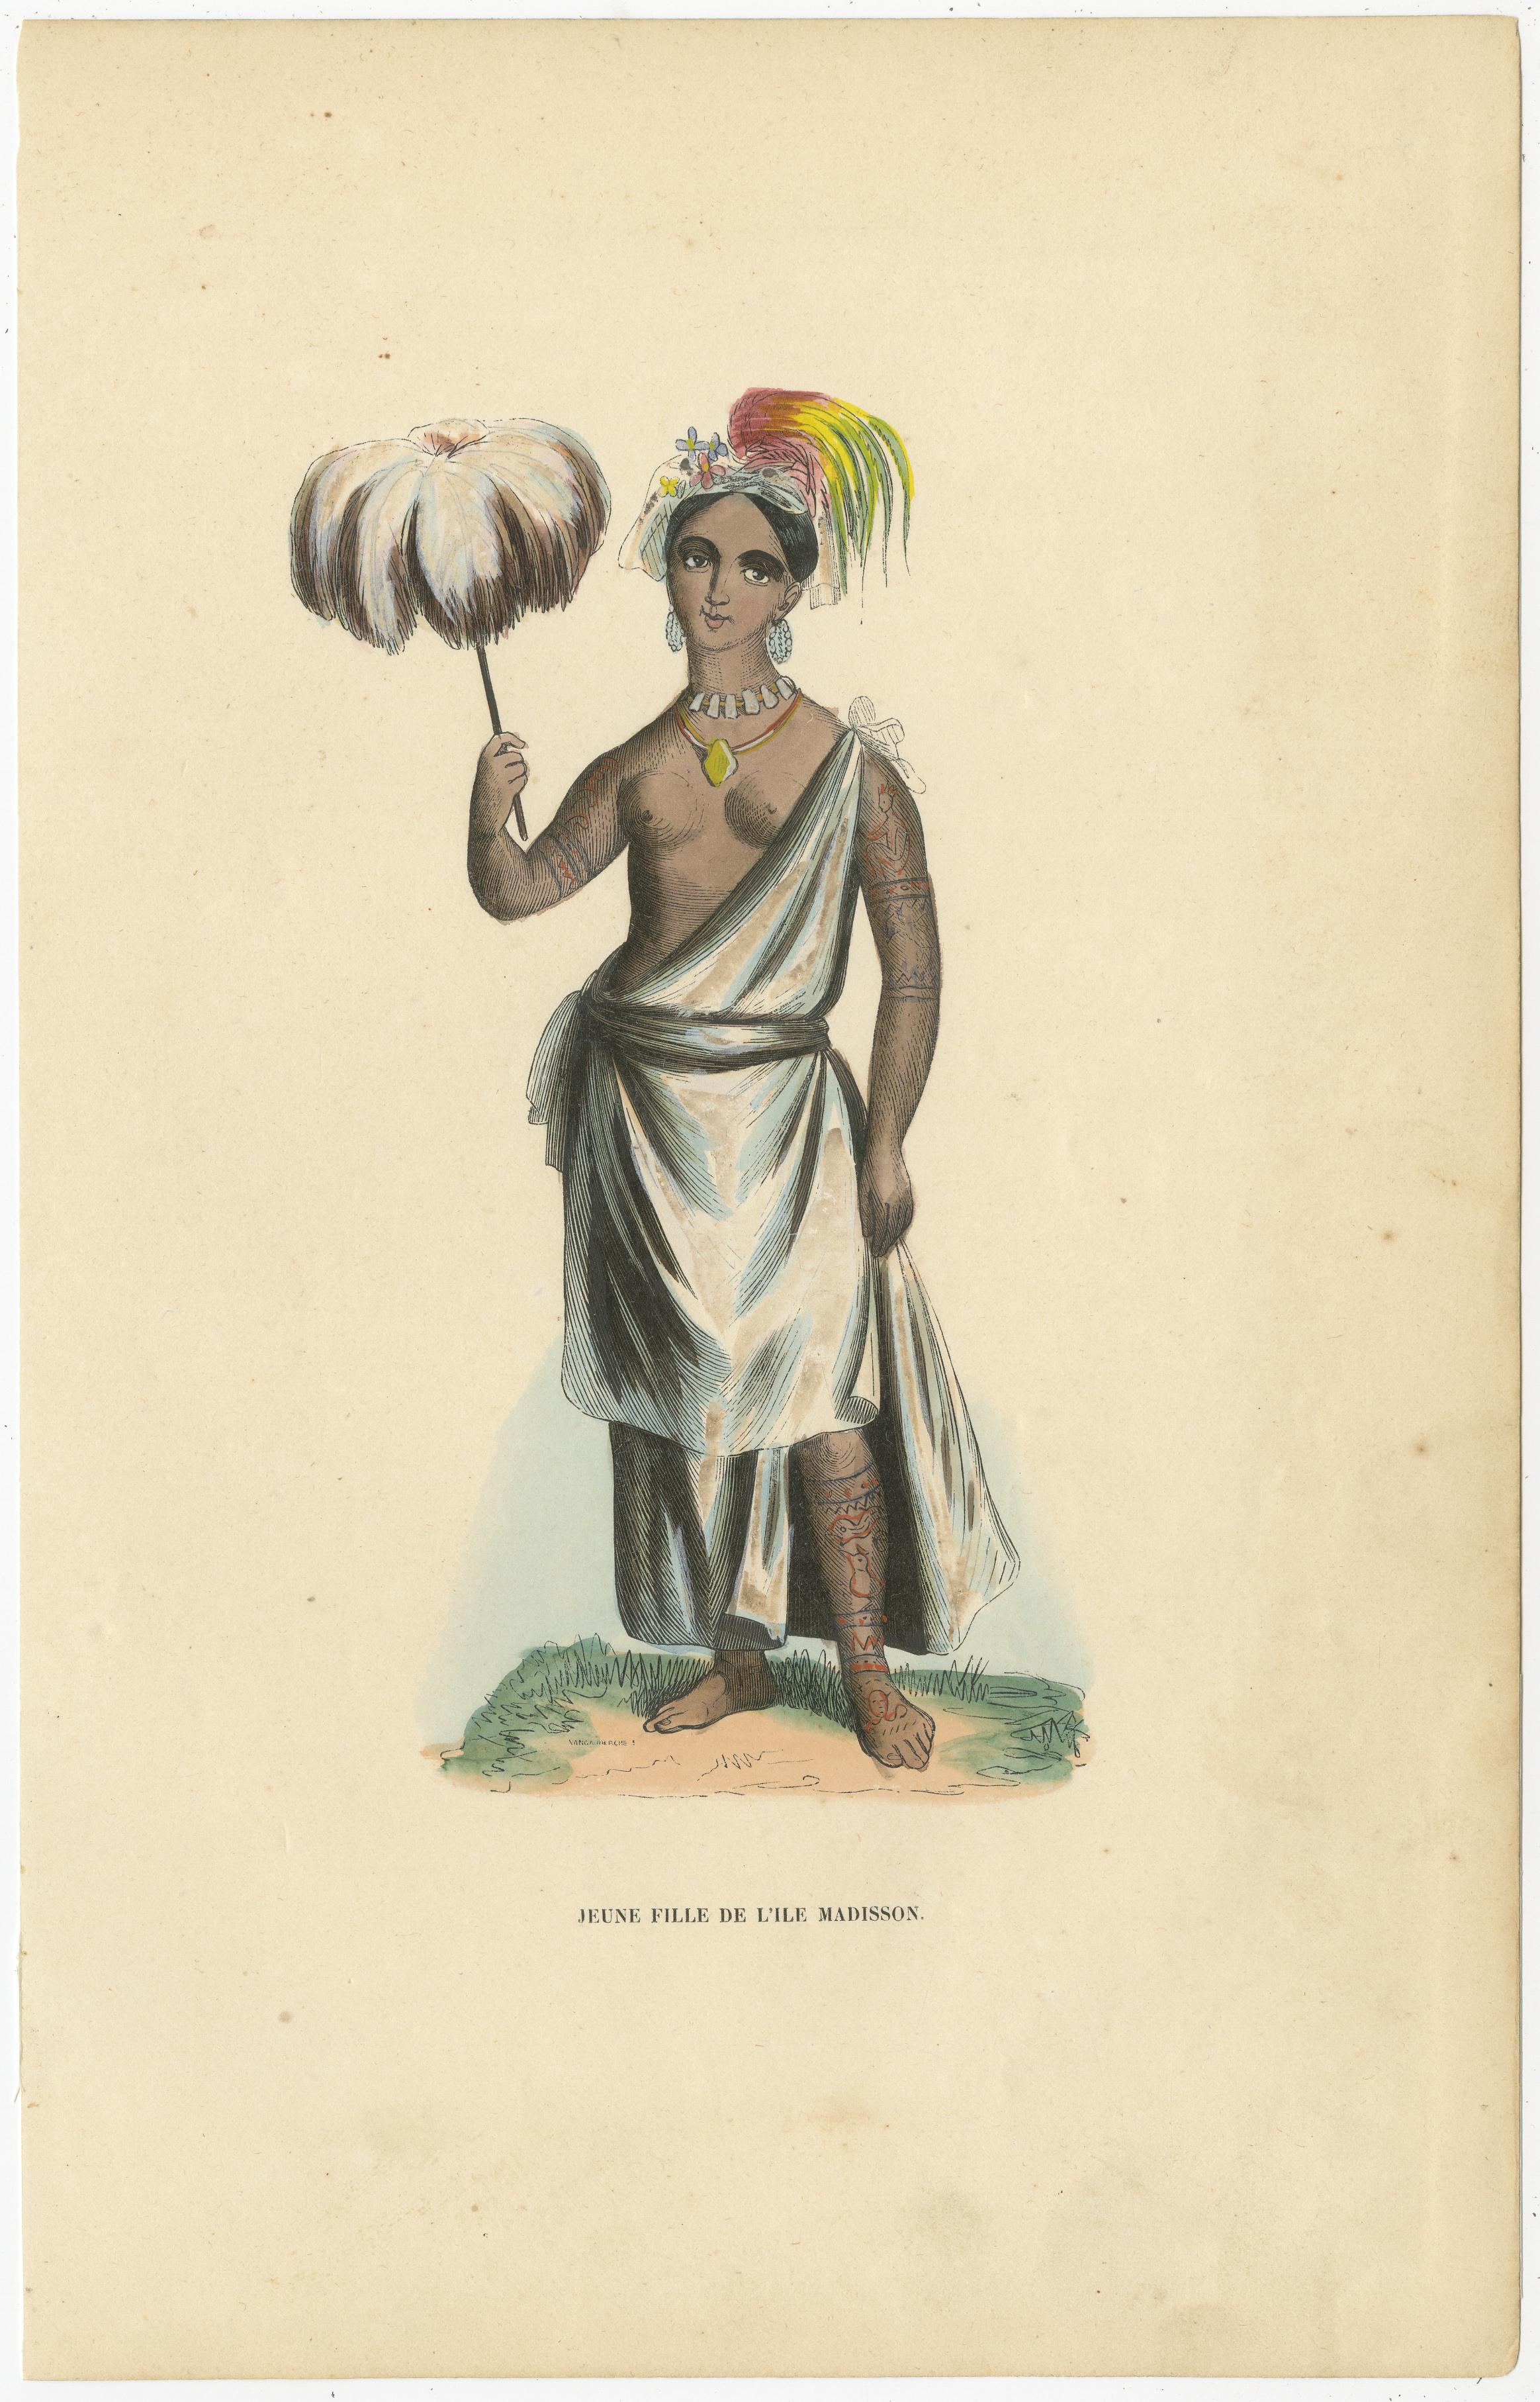 Antique print titled 'Jeune Fille de l'Ile Madisson'. Hand colored woodcut of Piteenee, a young woman of Nuku Hiva, Marquesas Islands (French Polynesia). She wears a white gown, cowrie necklace, feather headdress, and has tattooed limbs. 18-year-old